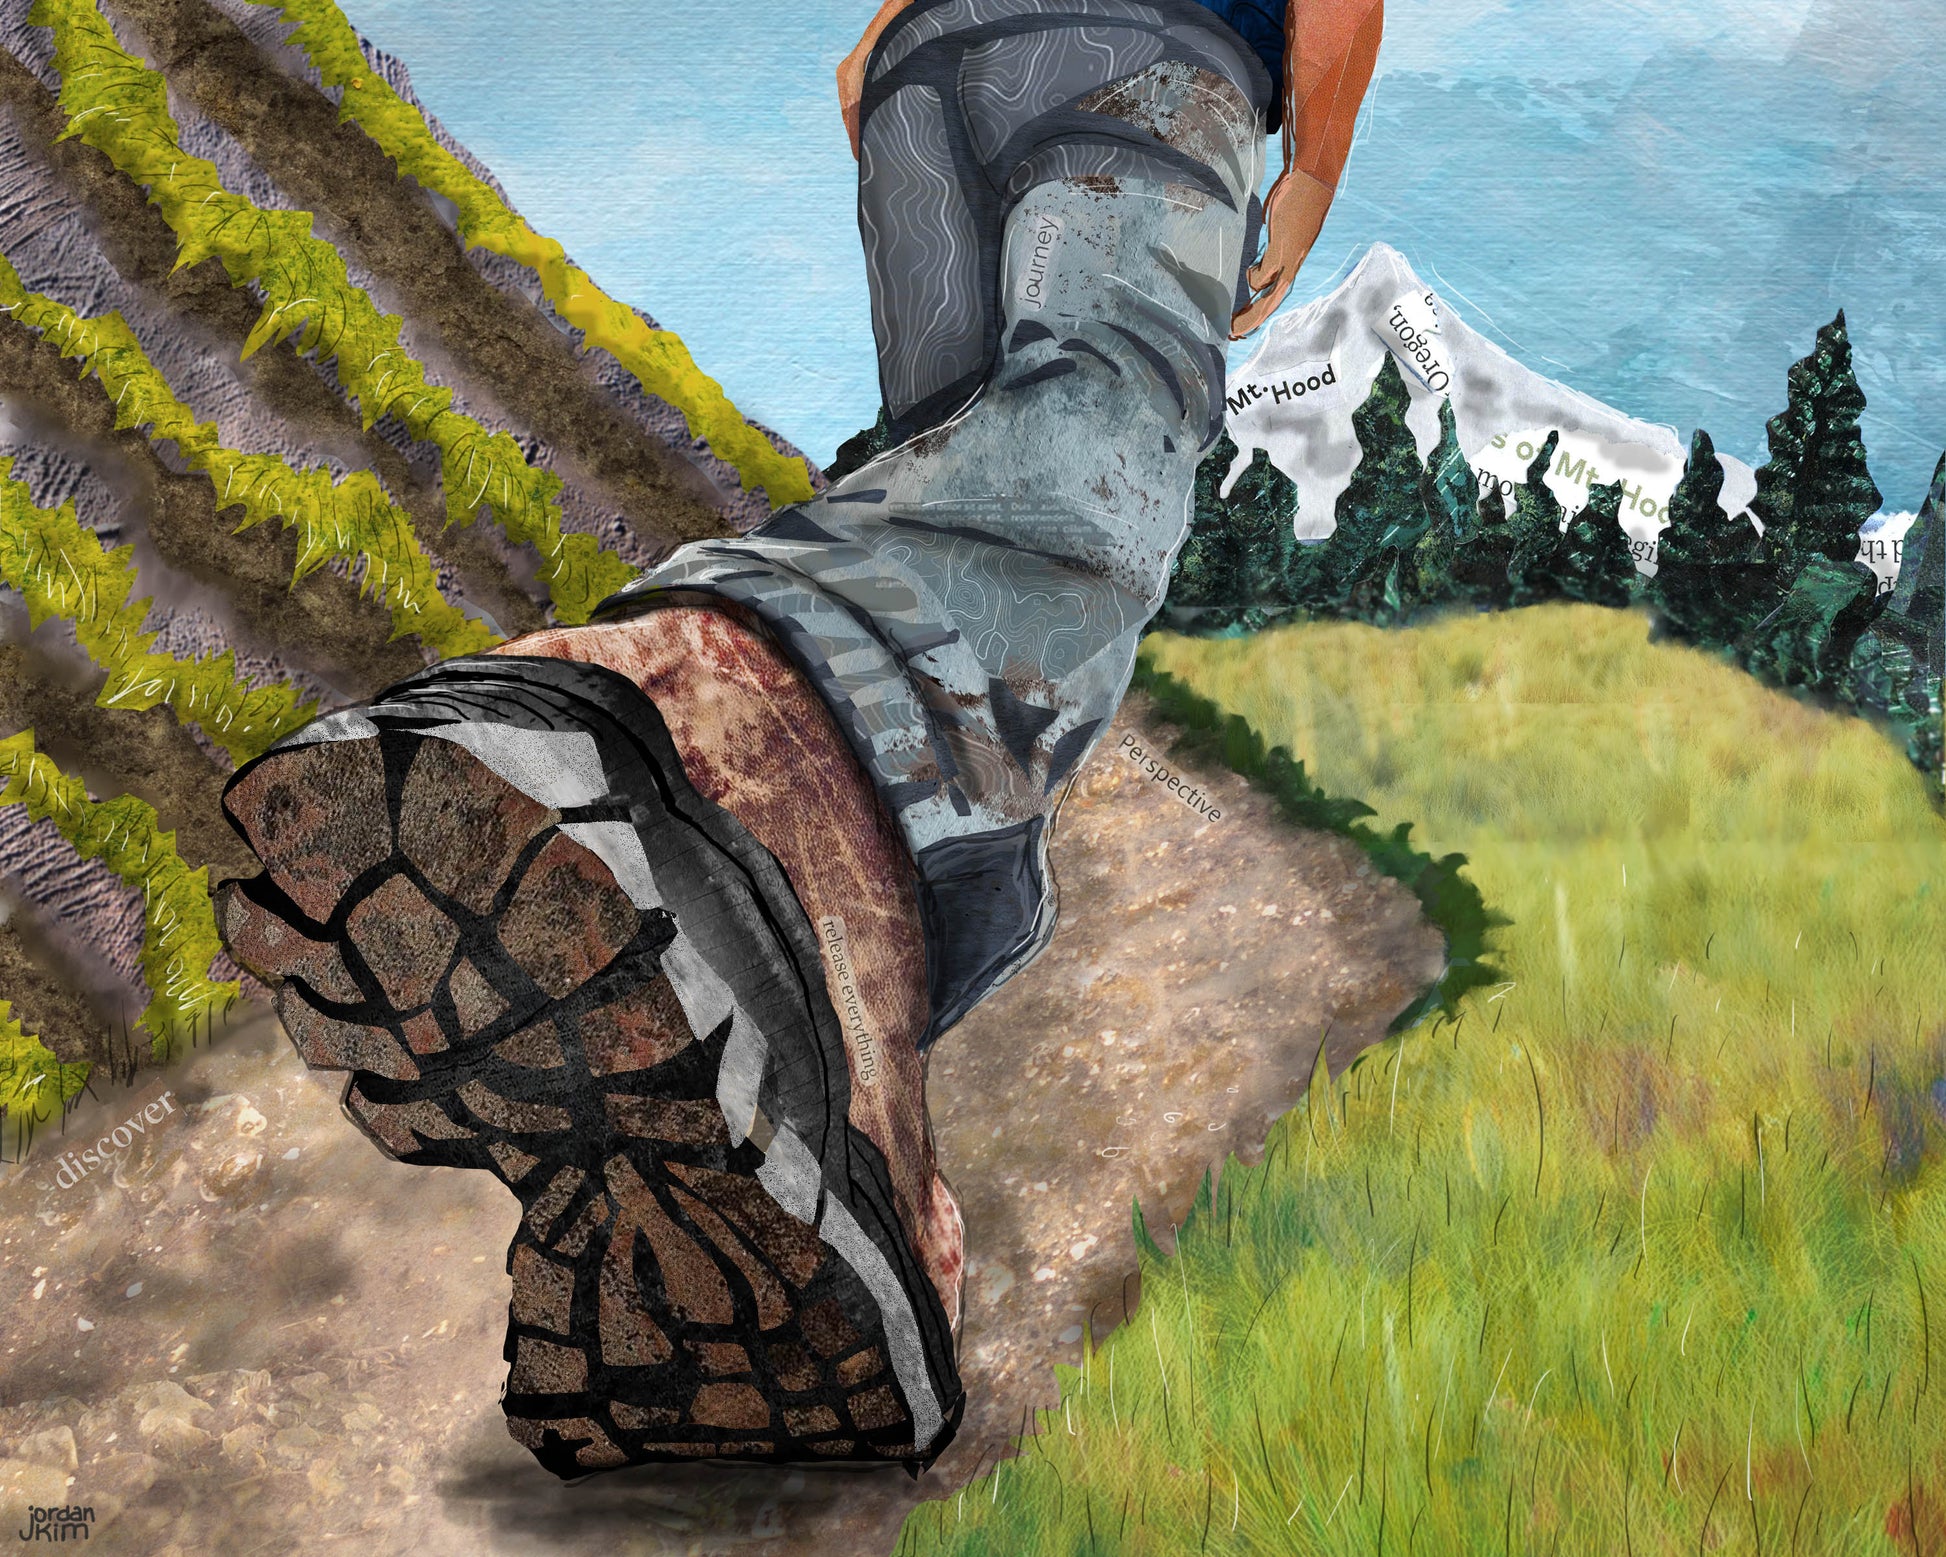 8x10 Art Print of a mixed media collage of a person hiking a trail toward Mt. Hood, Oregon